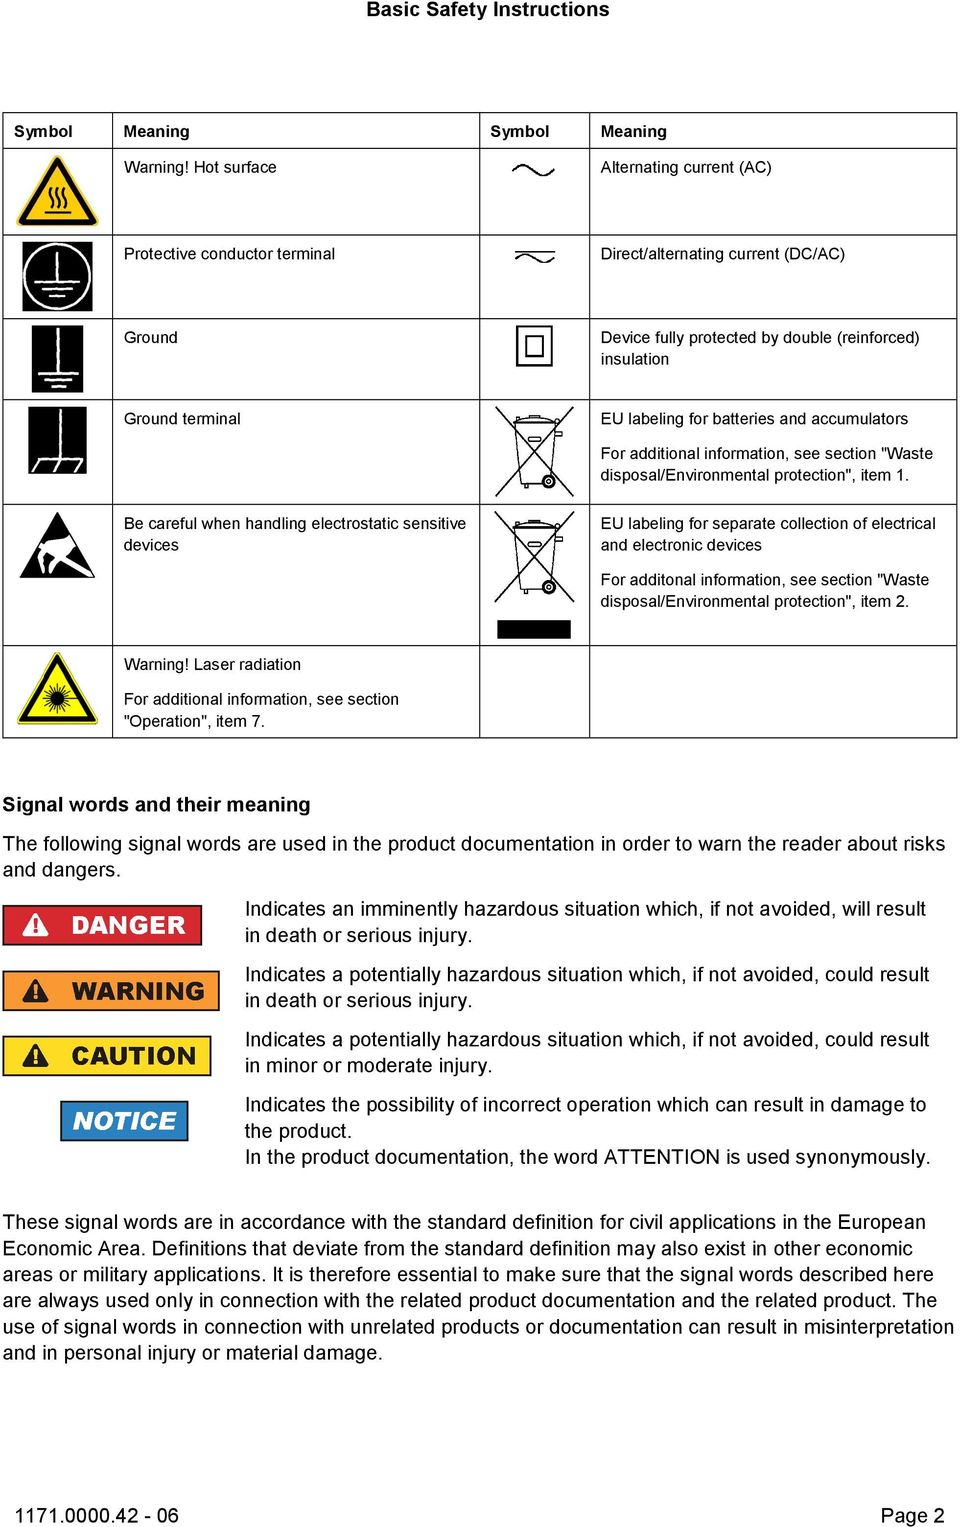 batteries and accumulators For additional information, see section "Waste disposal/environmental protection", item 1.